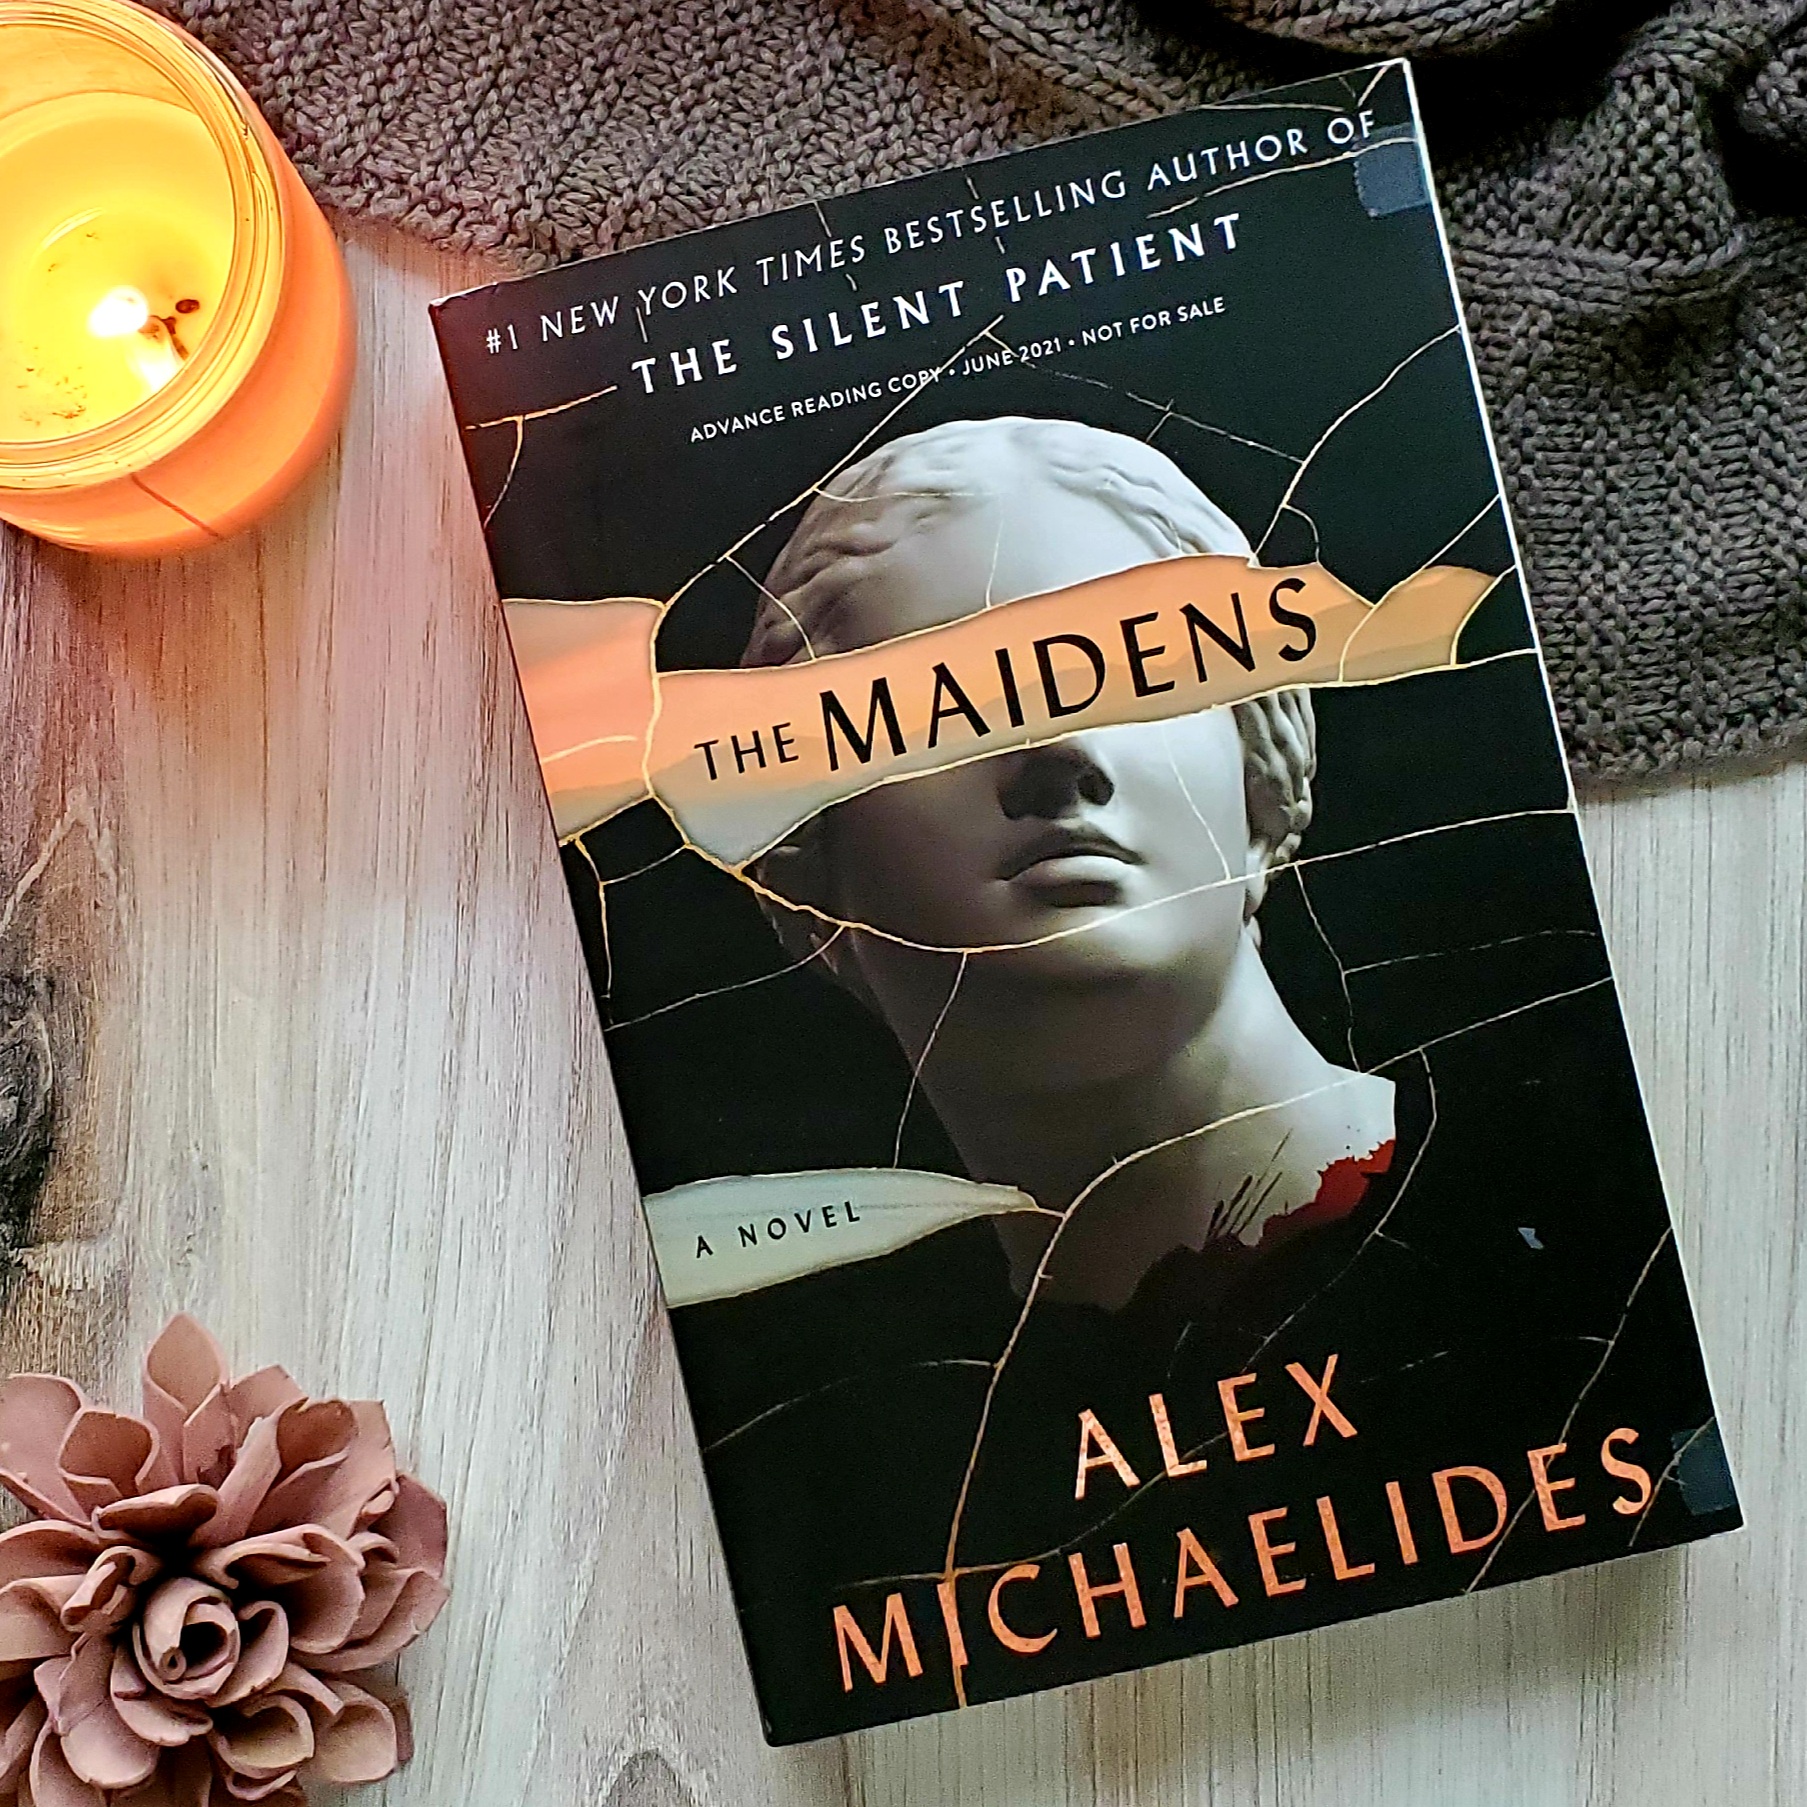 Book Review of THE MAIDENS